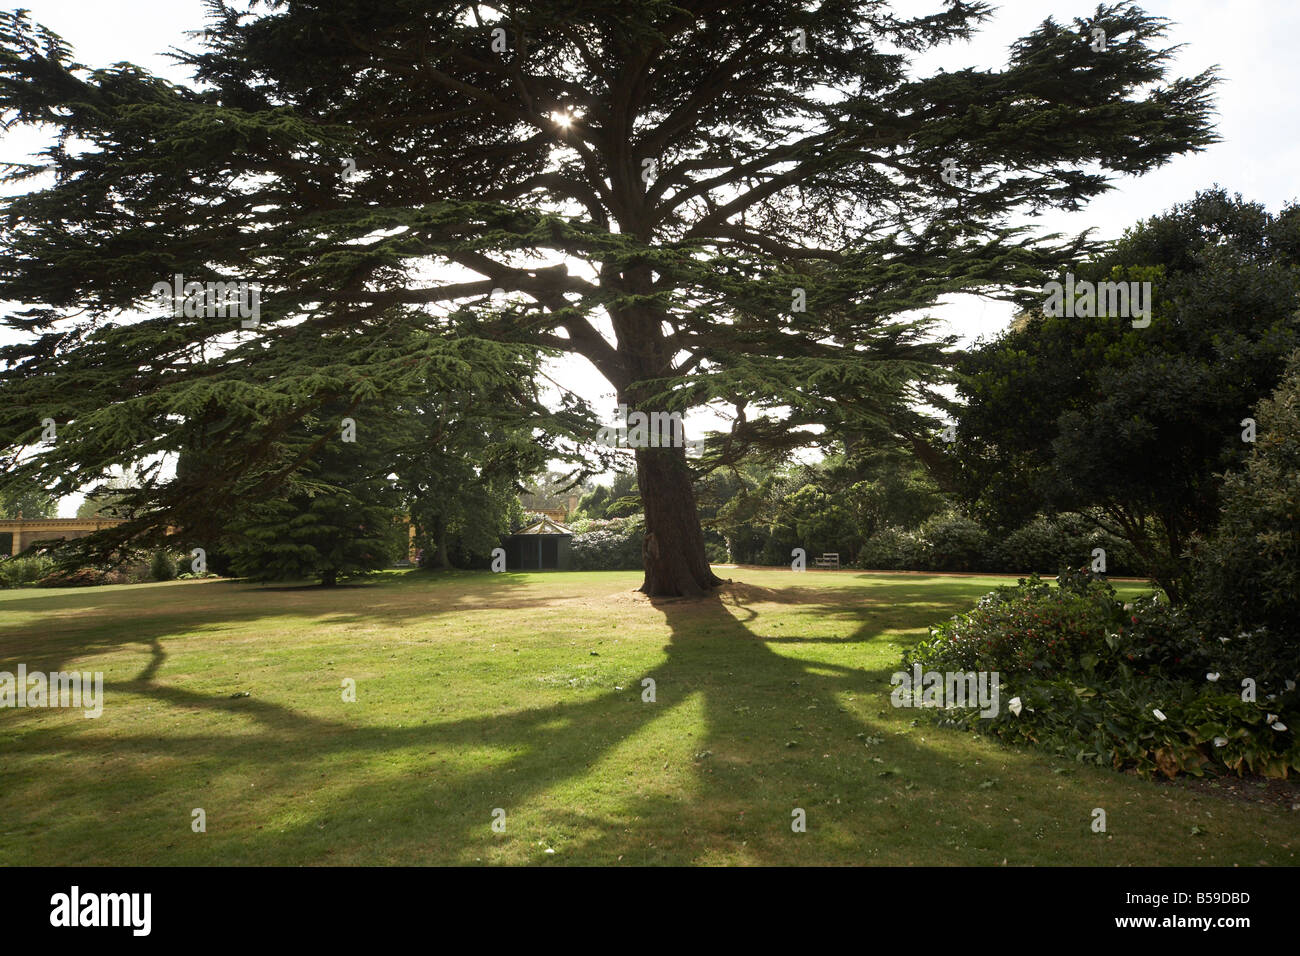 Cedar tree in lawn at Osborne House former home of Queen Victoria East Cowes Isle of Wight England UK English Heritage Stock Photo